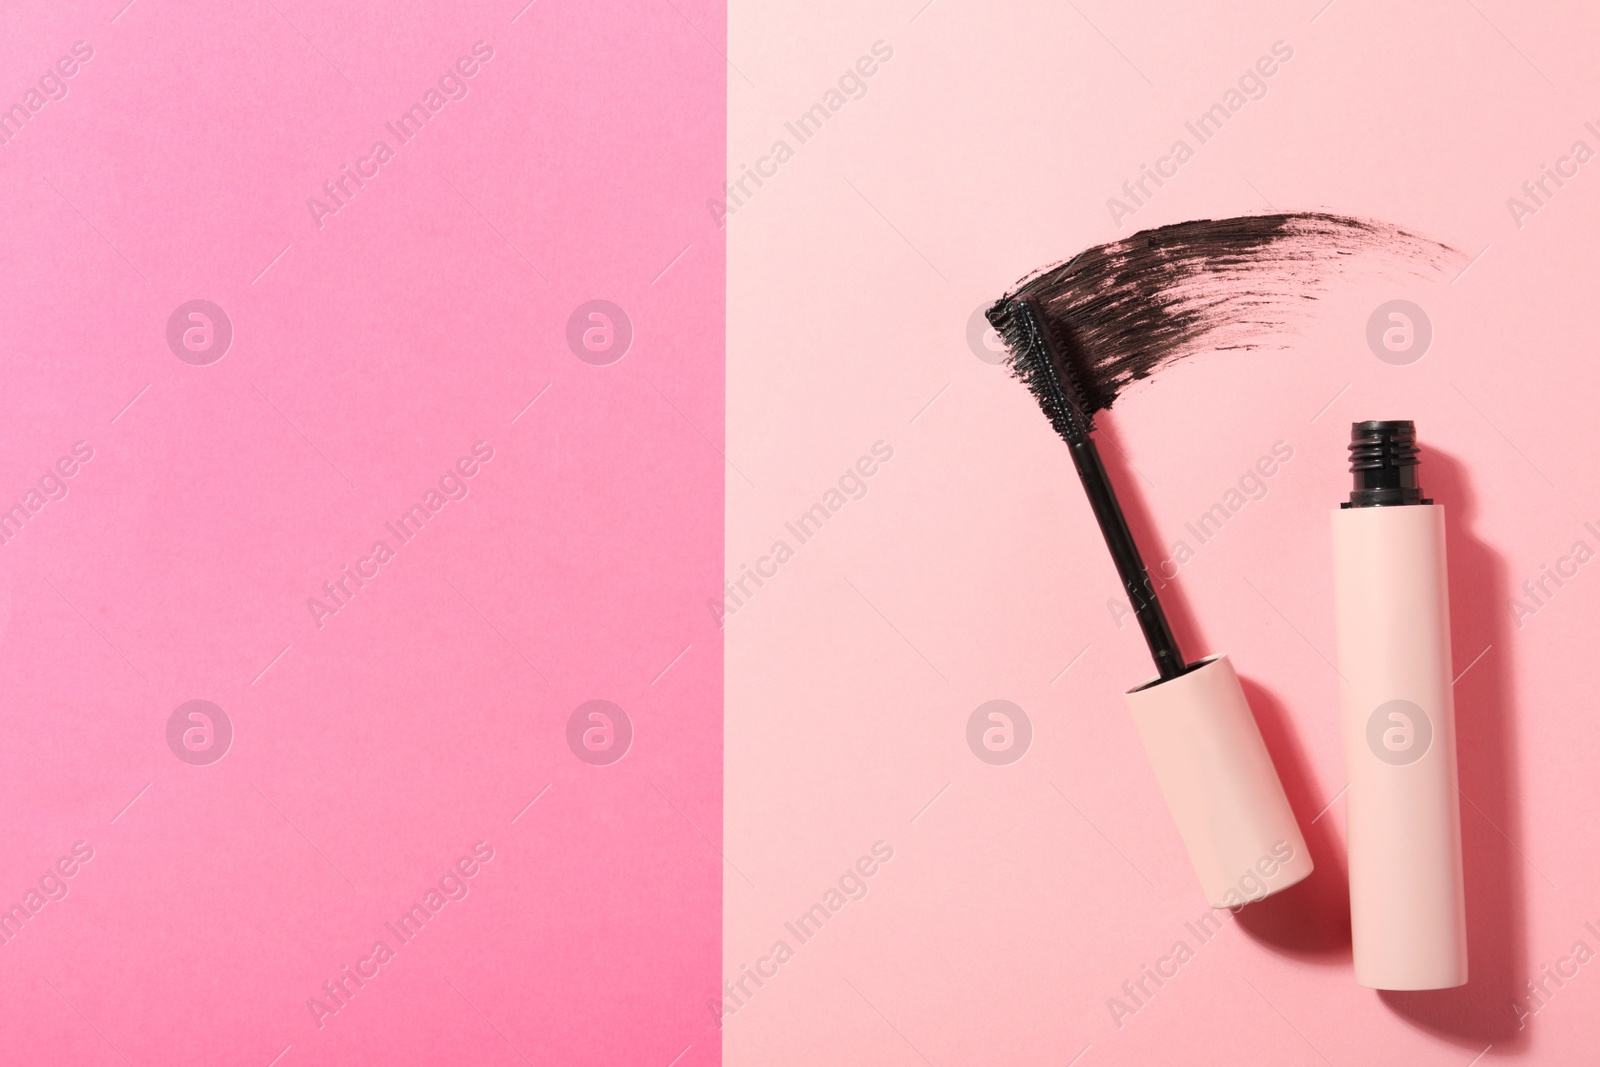 Photo of Mascara and smear on pink background, flat lay with space for text. Makeup product